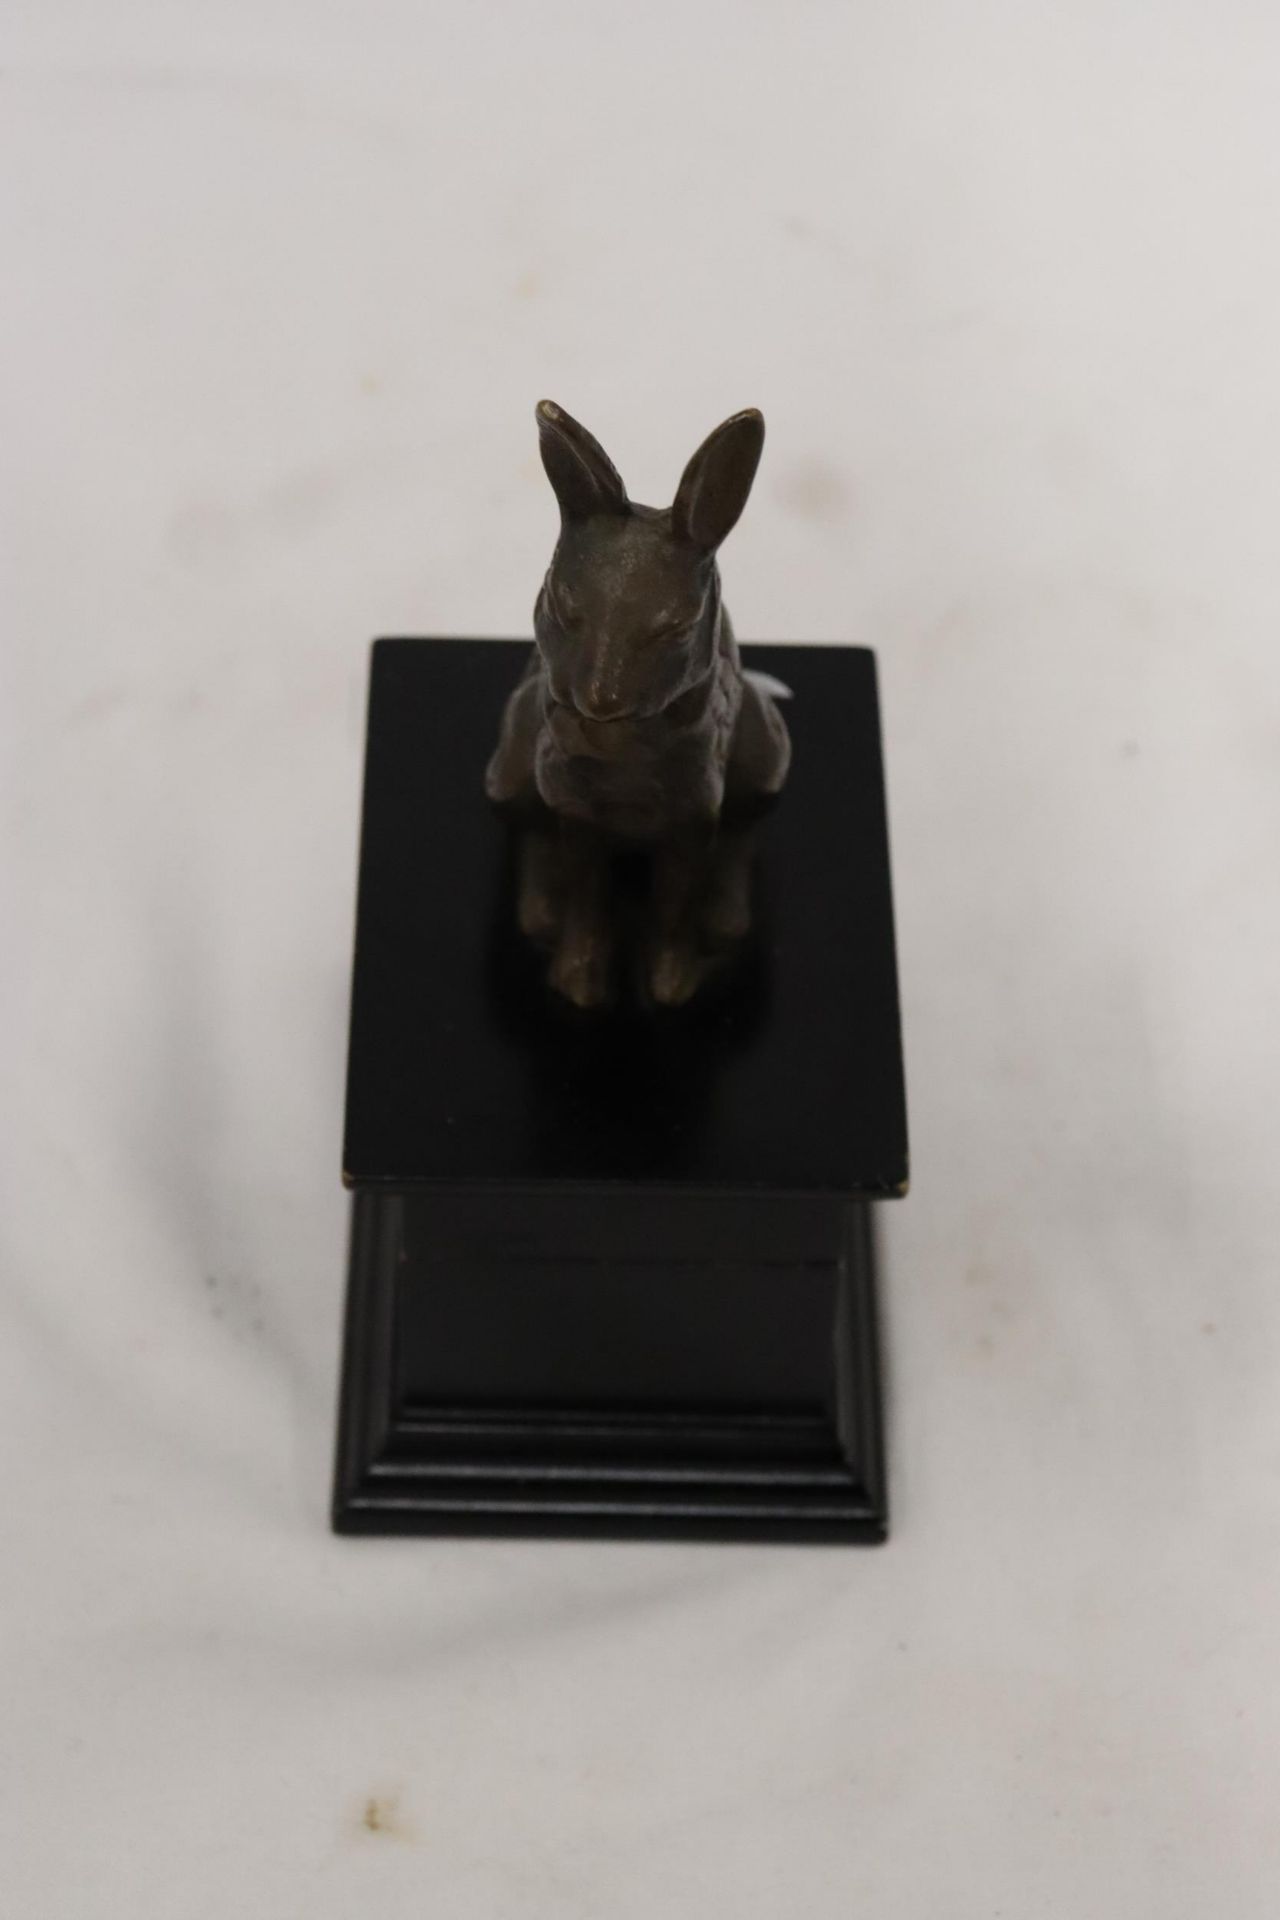 A FIGURE OF A HARE SITTING ON A WOODEN TRINKET BOX - Image 5 of 6